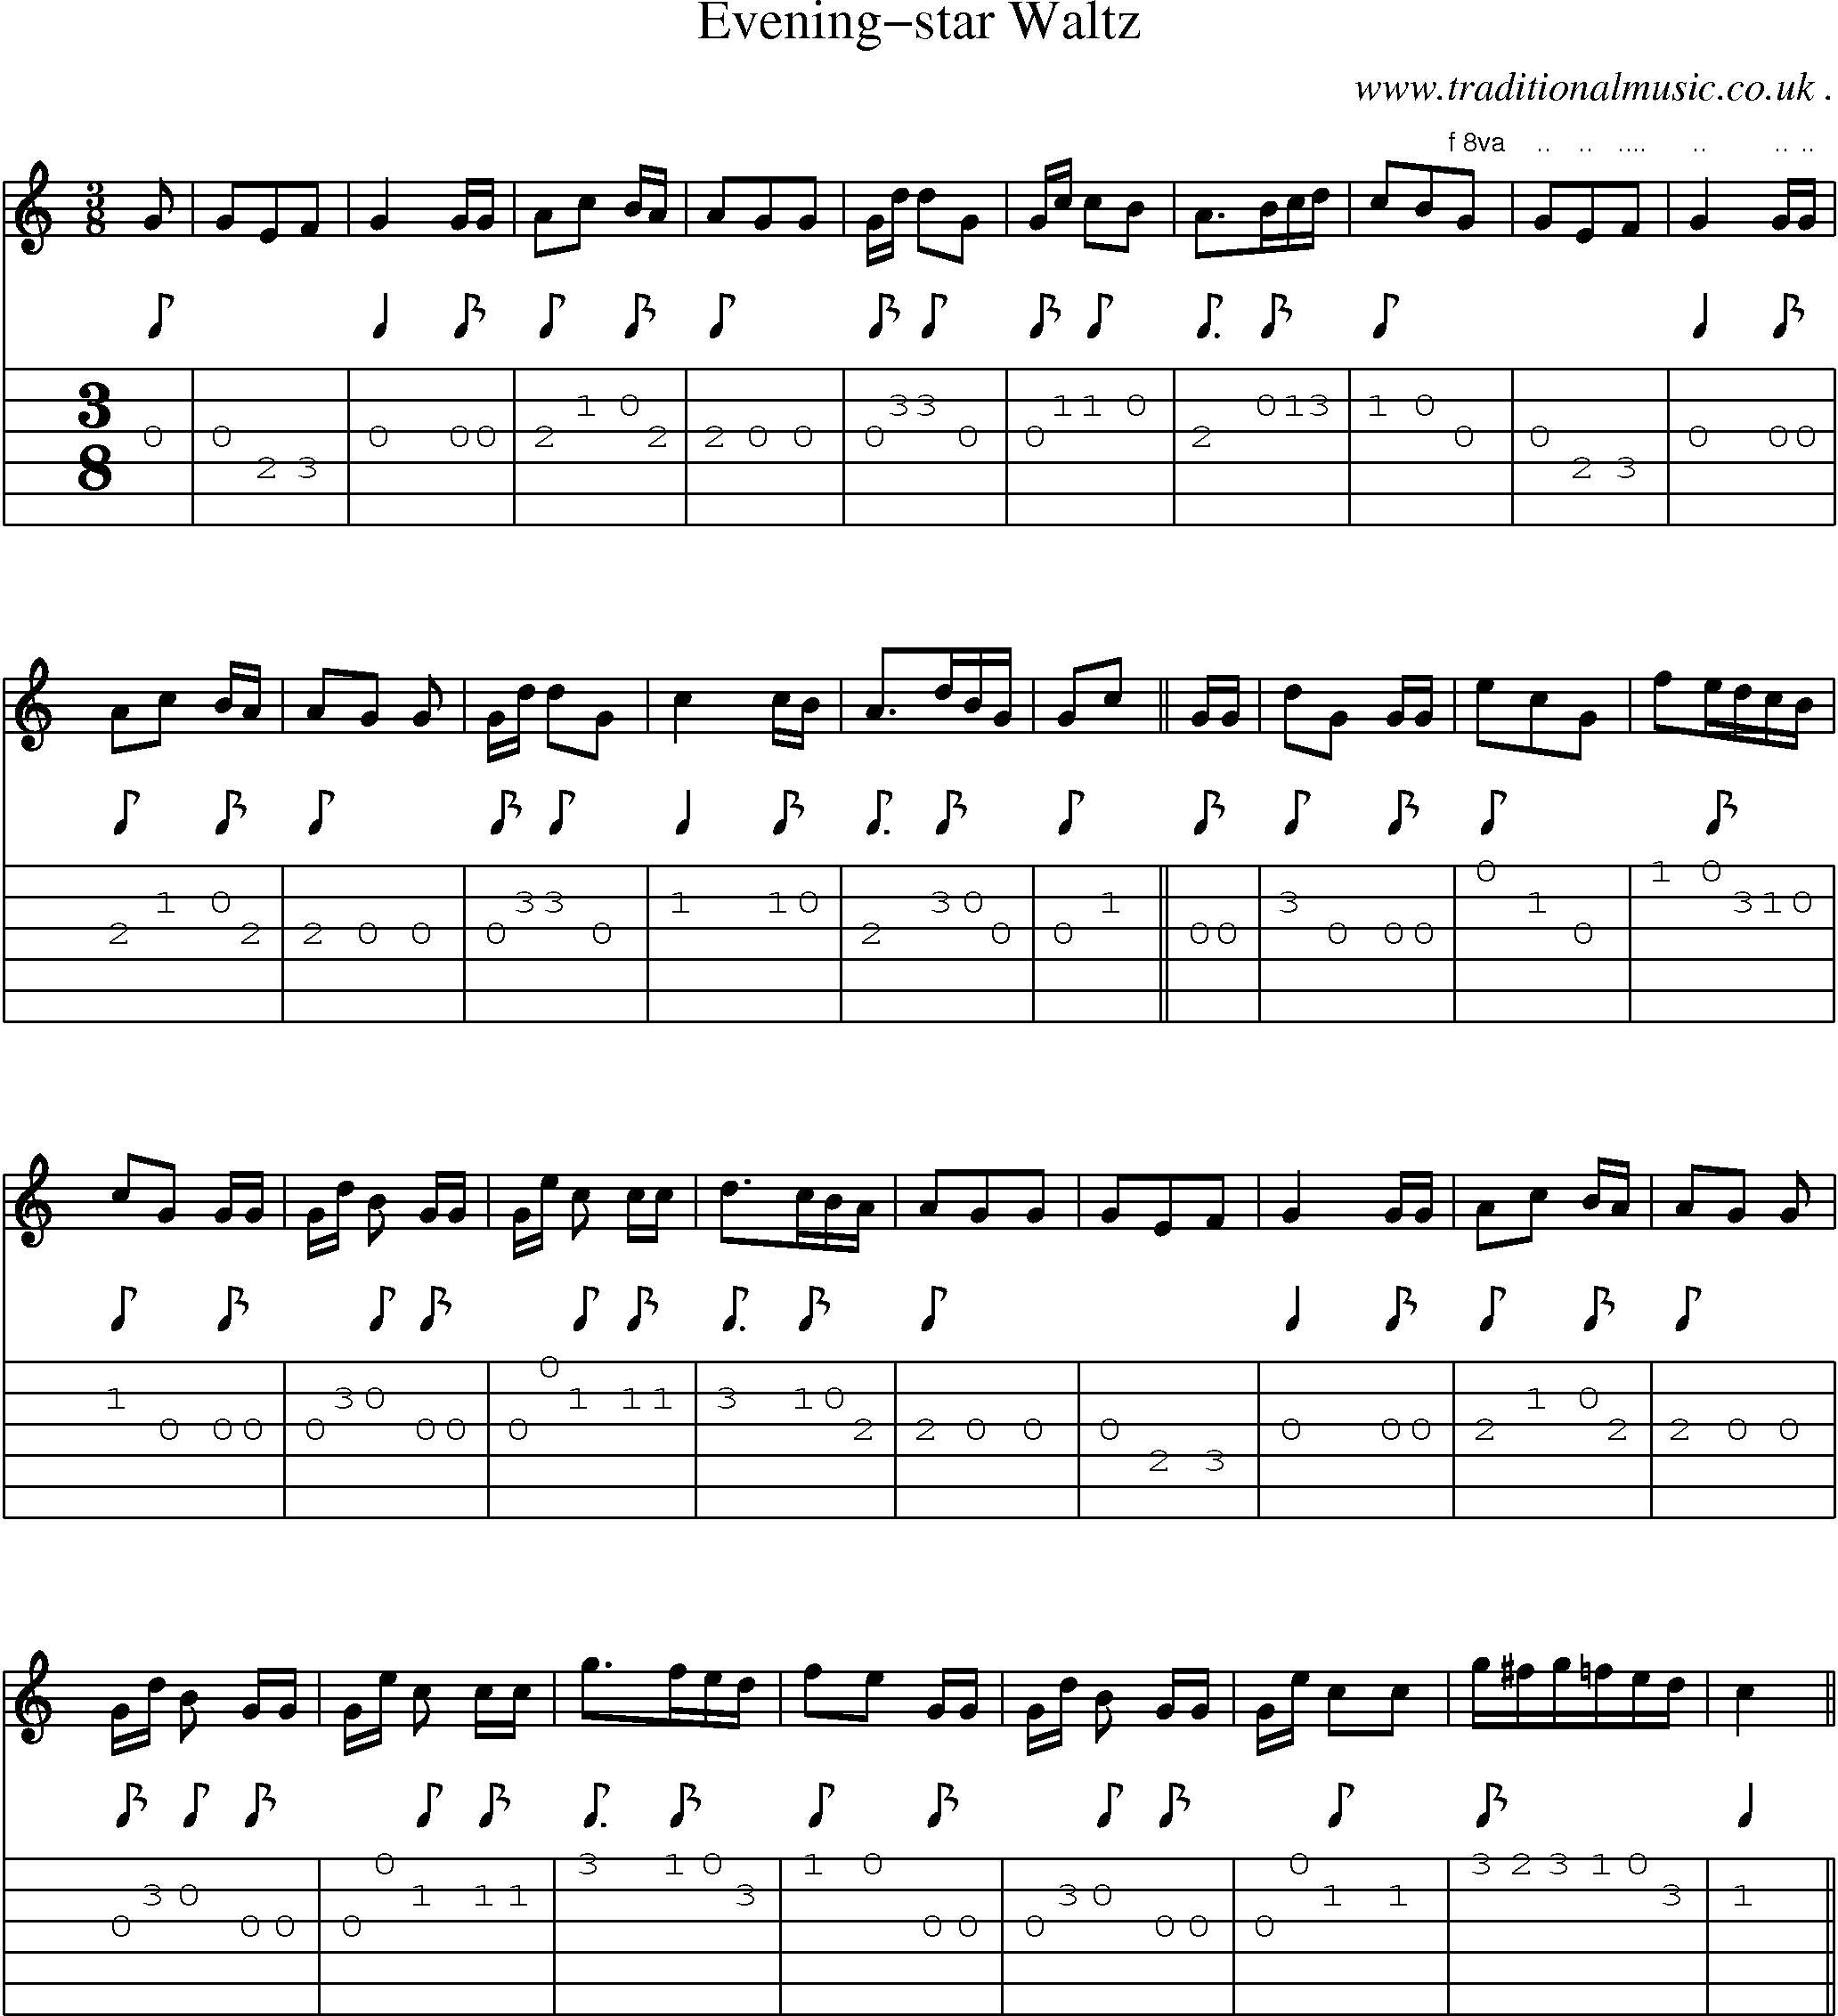 Sheet-Music and Guitar Tabs for Evening-star Waltz